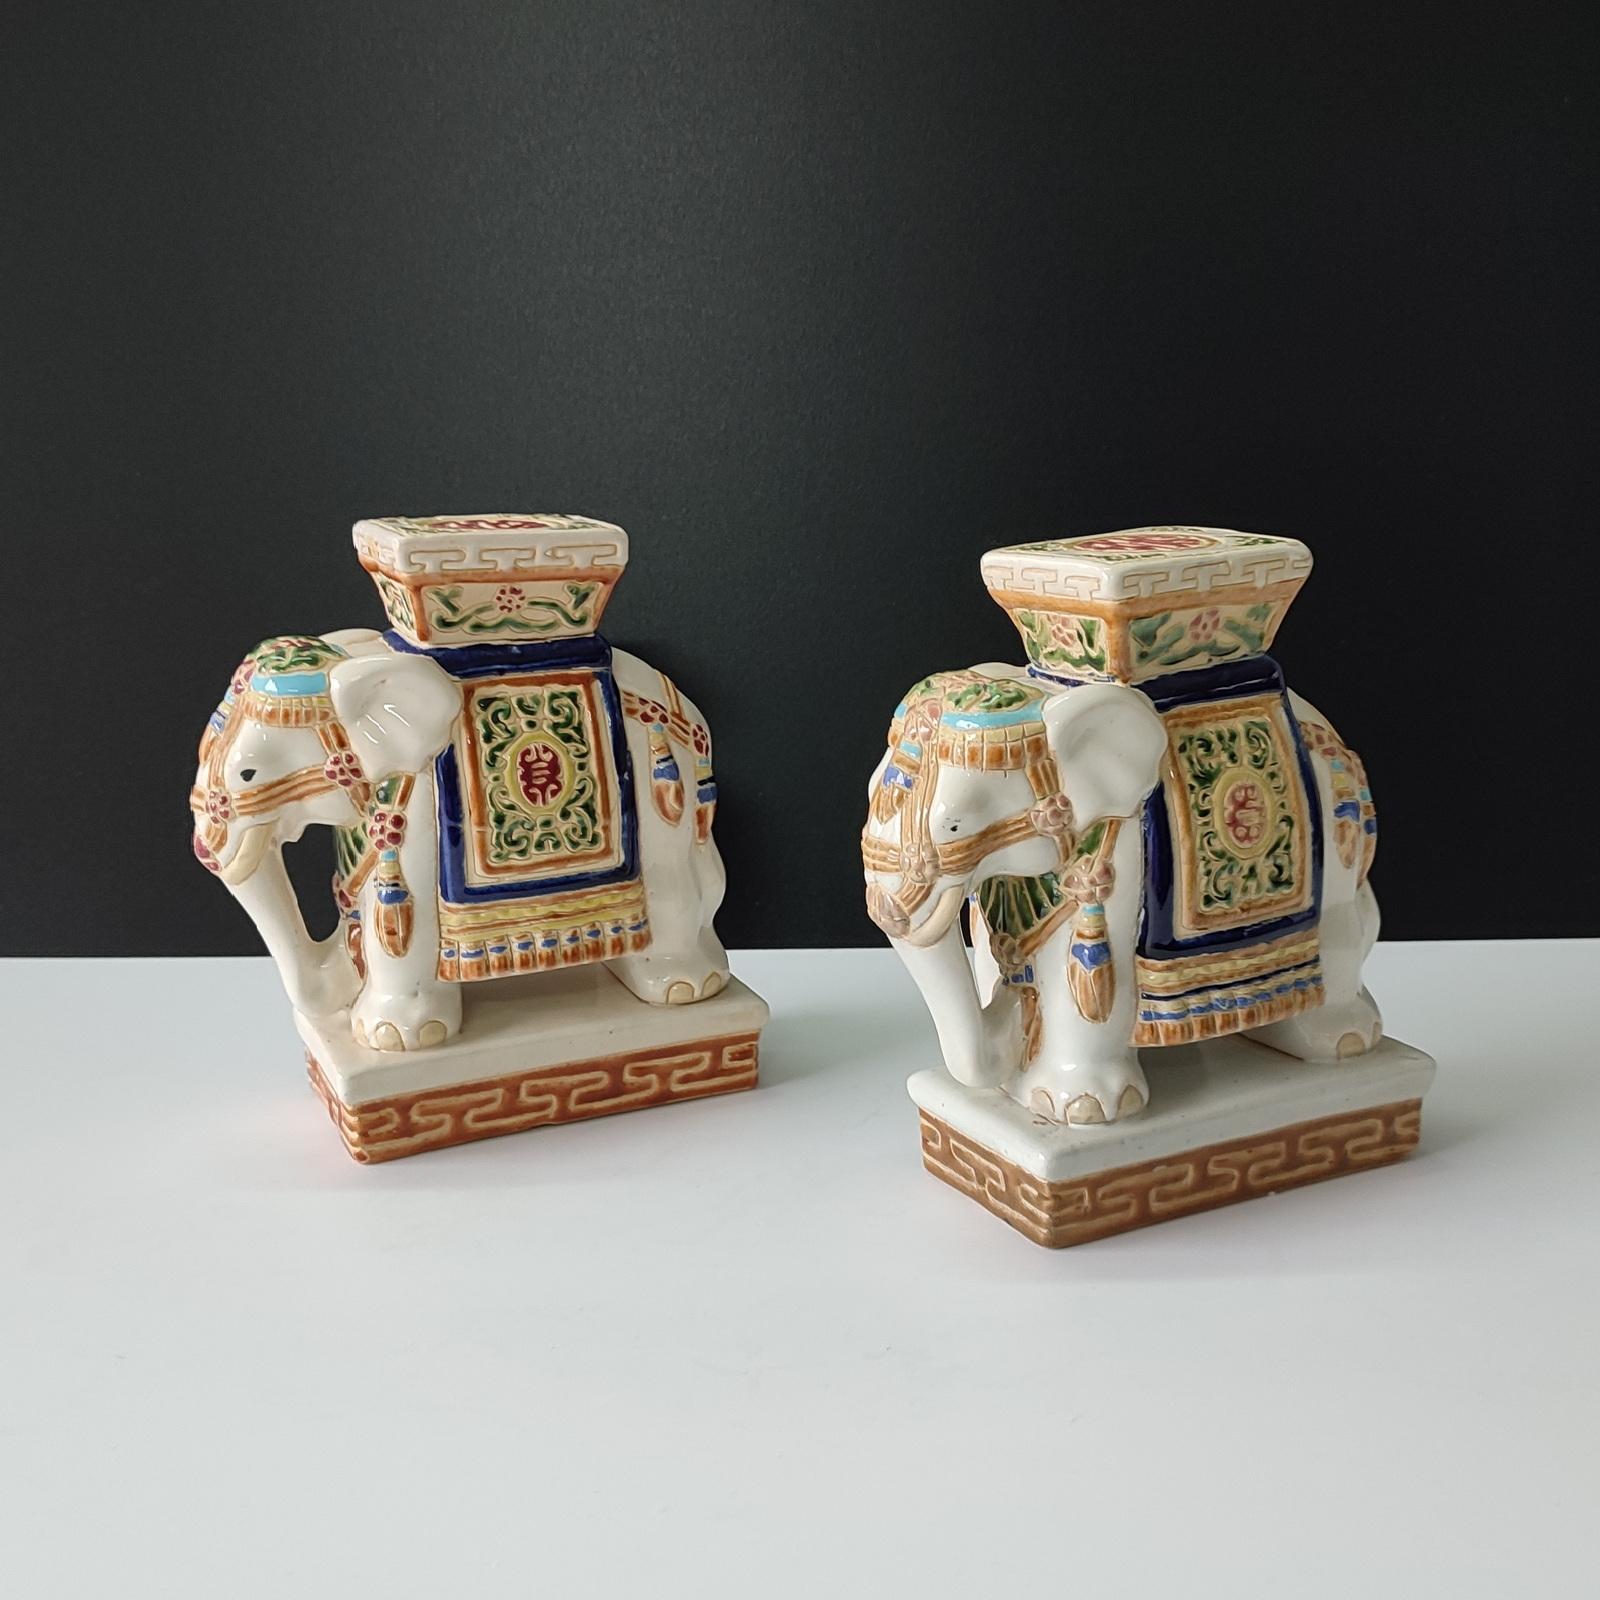 Asian Pair of Polychrome Ceramic Elephant Plant Holder, Bookends, Mid 20th Century For Sale